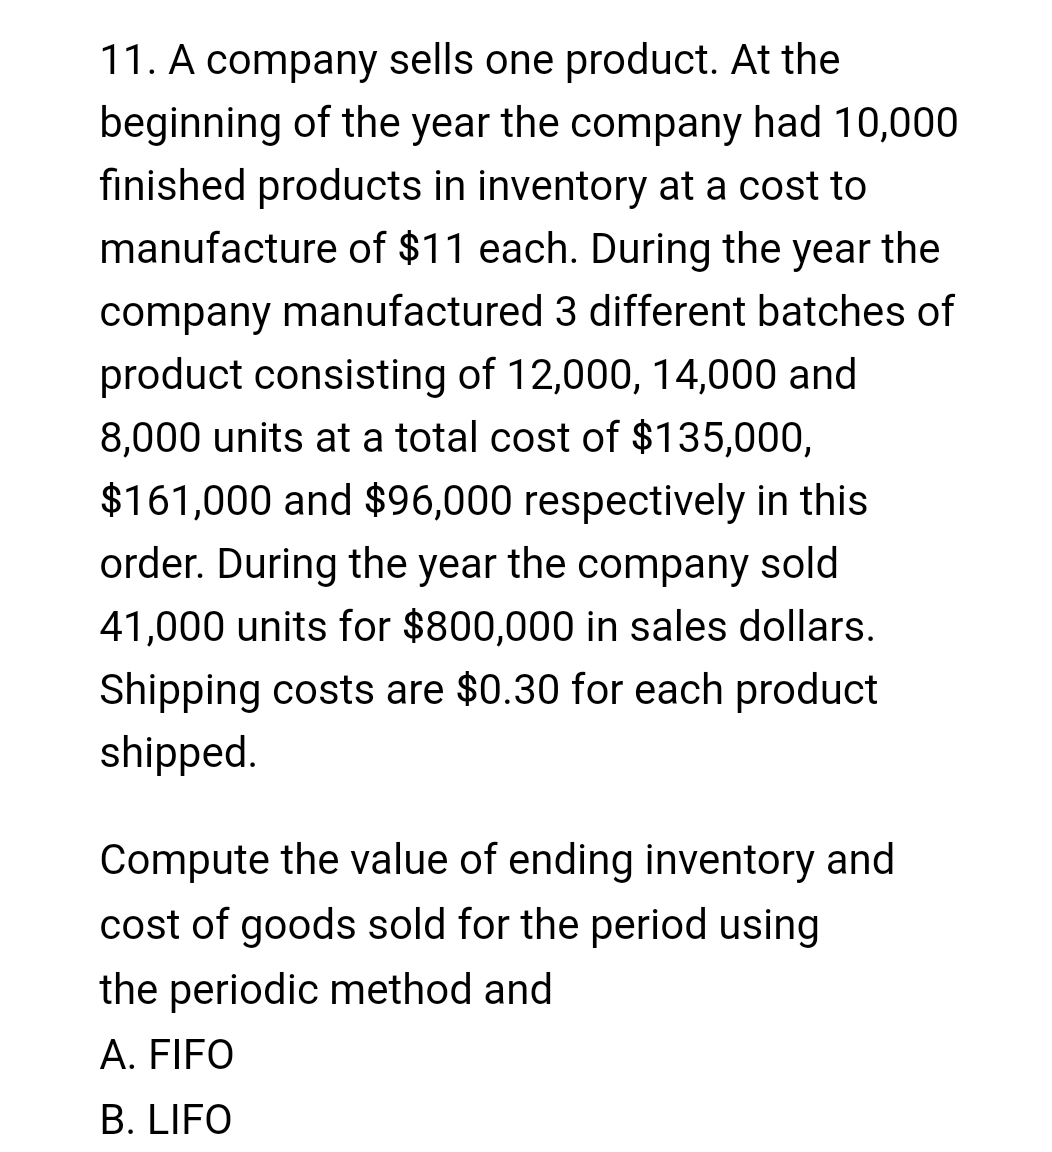 11. A company sells one product. At the
beginning of the year the company had 10,000
finished products in inventory at a cost to
manufacture of $11 each. During the year the
company manufactured 3 different batches of
product consisting of 12,000, 14,000 and
8,000 units at a total cost of $135,000,
$161,000 and $96,000 respectively in this
order. During the year the company sold
41,000 units for $800,000 in sales dollars.
Shipping costs are $0.30 for each product
shipped.
Compute the value of ending inventory and
ost of goods sold for the period using
the periodic method and
A. FIFO
B. LIFO
